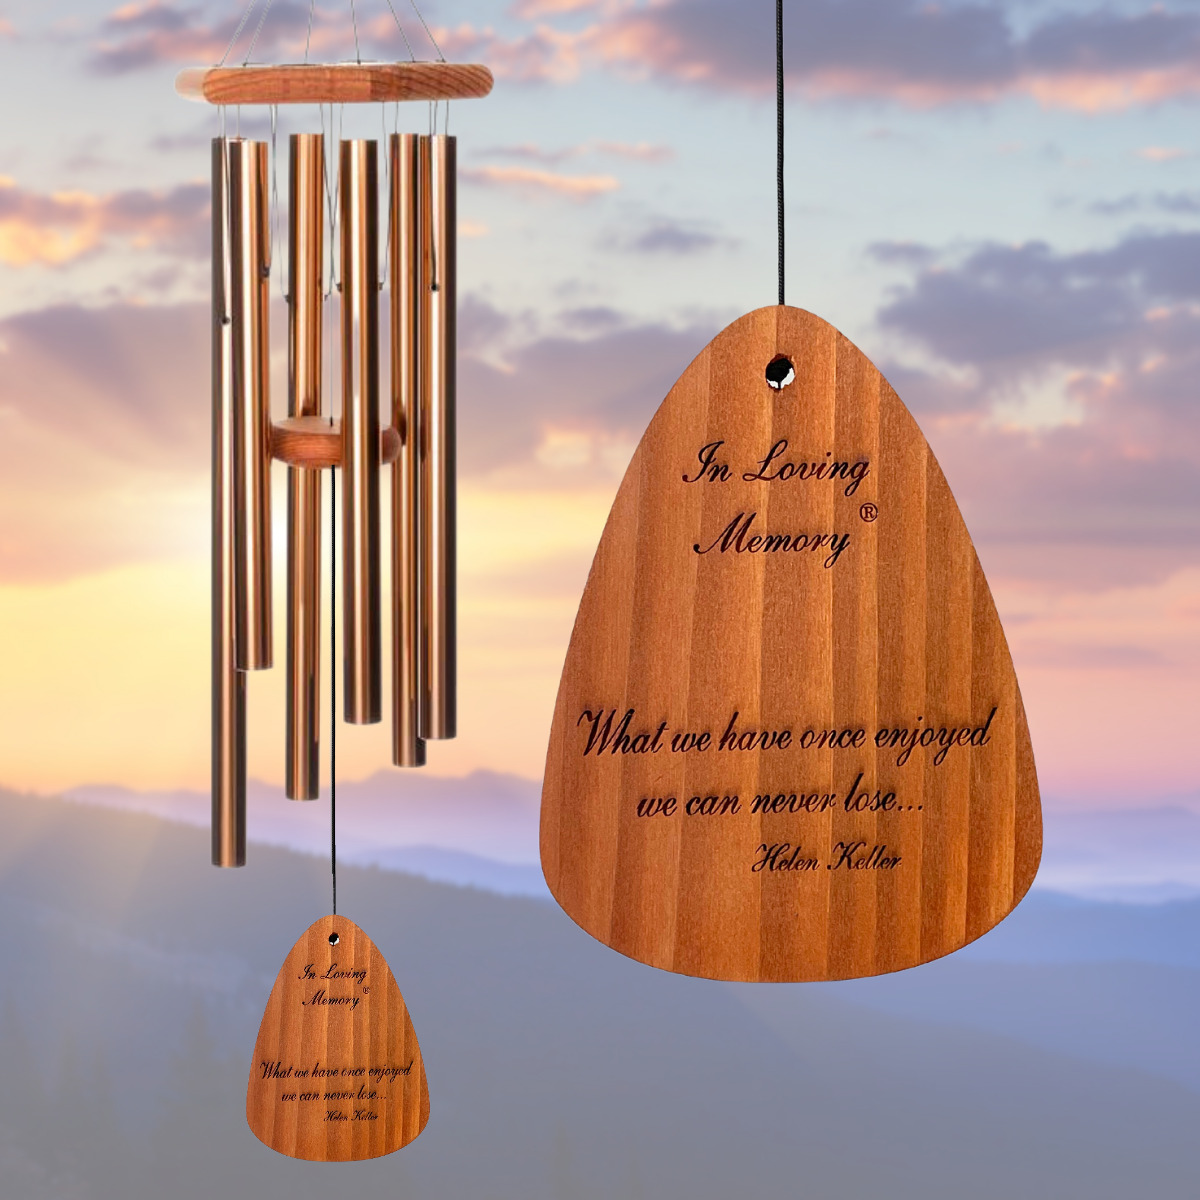 In Loving Memory 35 Inch Windchime - What we have once enjoyed.. in Bronze